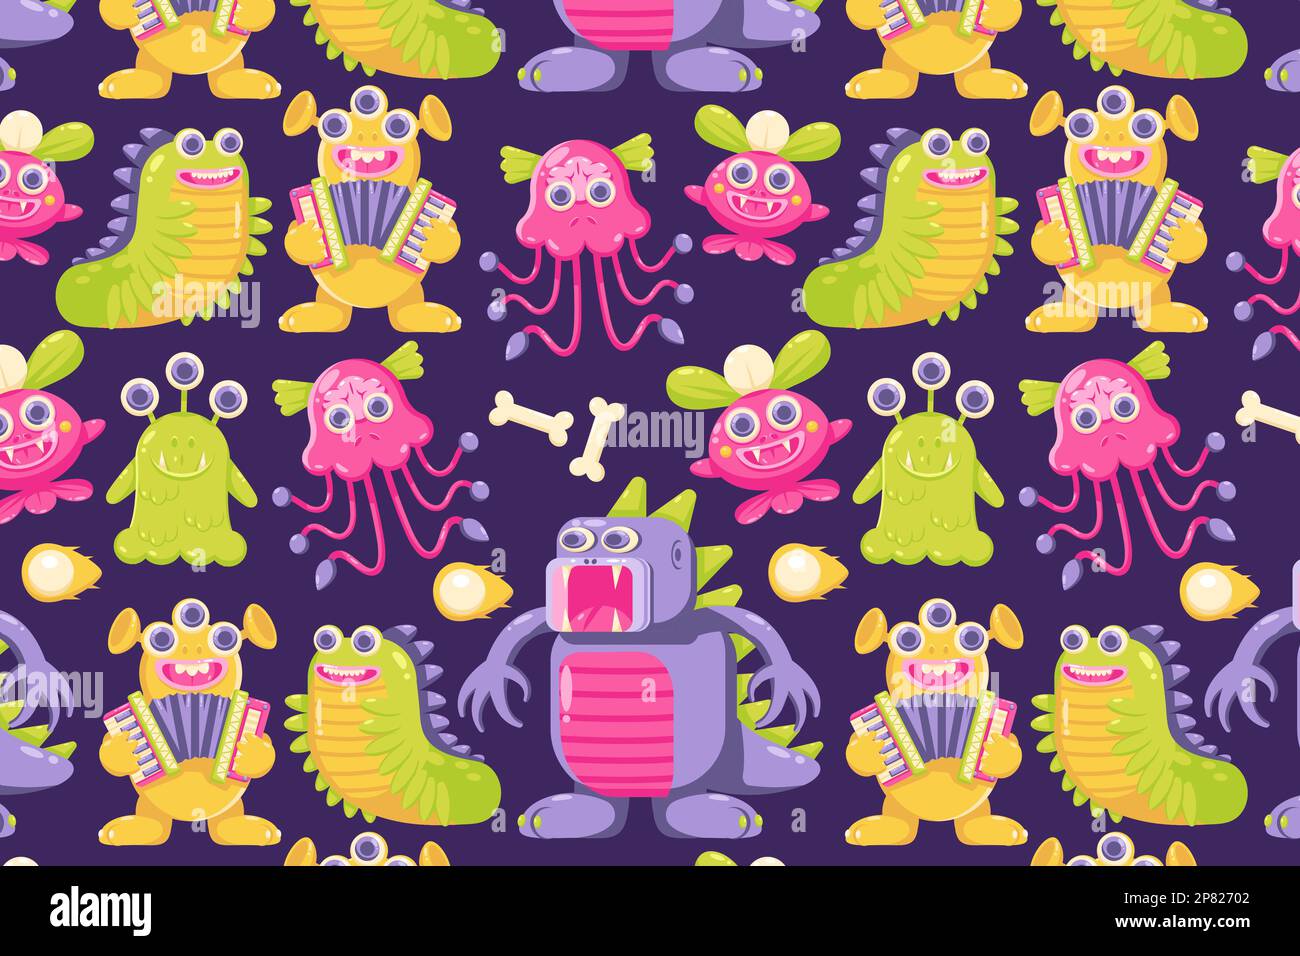 Cute monsters. Caterpillar patterns, crocodiles, playing music and jellyfish monsters Stock Vector